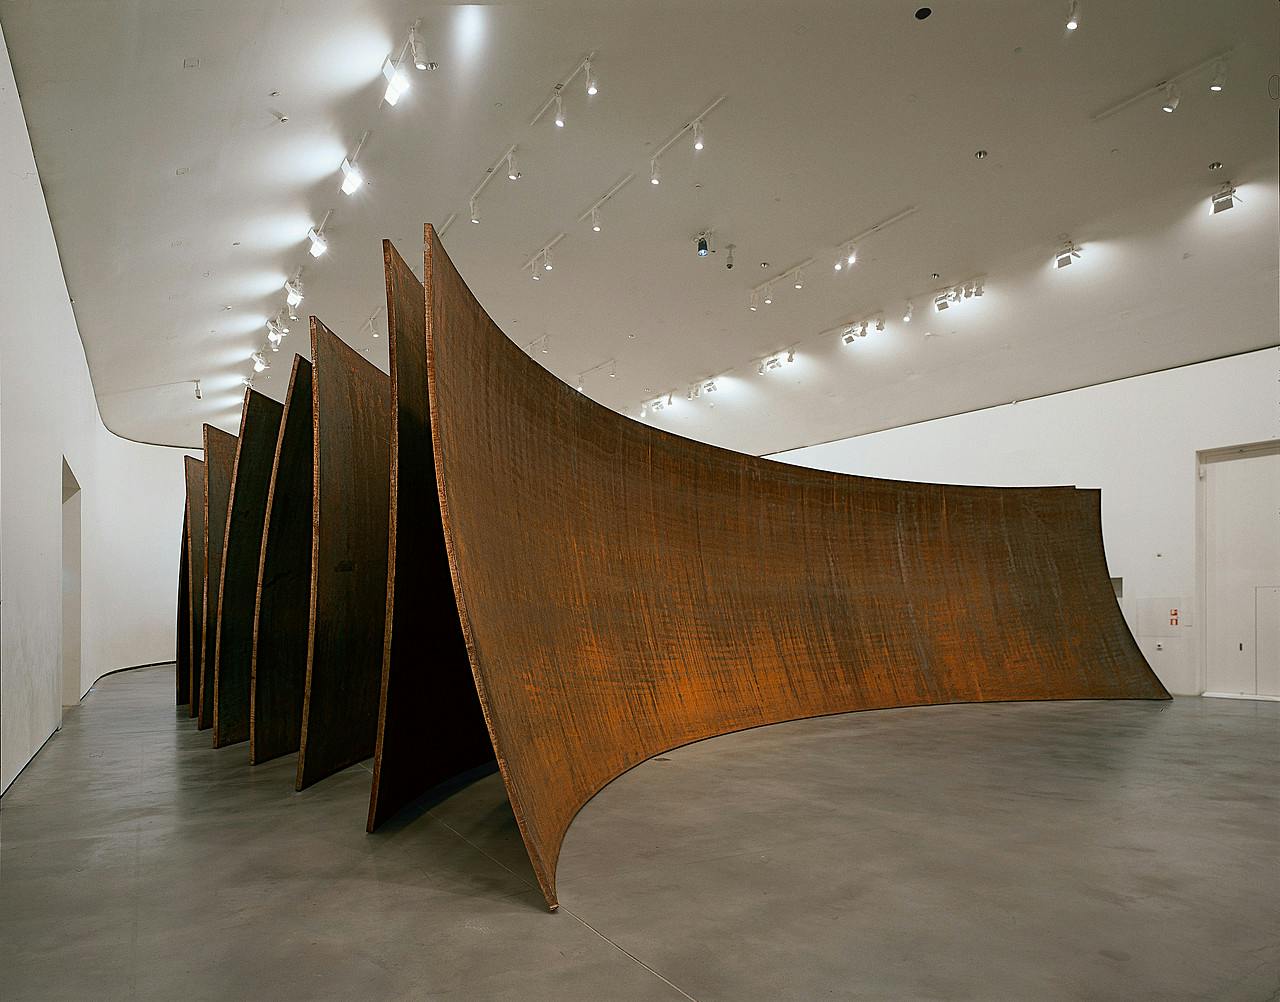 "Between the Torus and the Sphere" by Richard Serra at Guggenheim